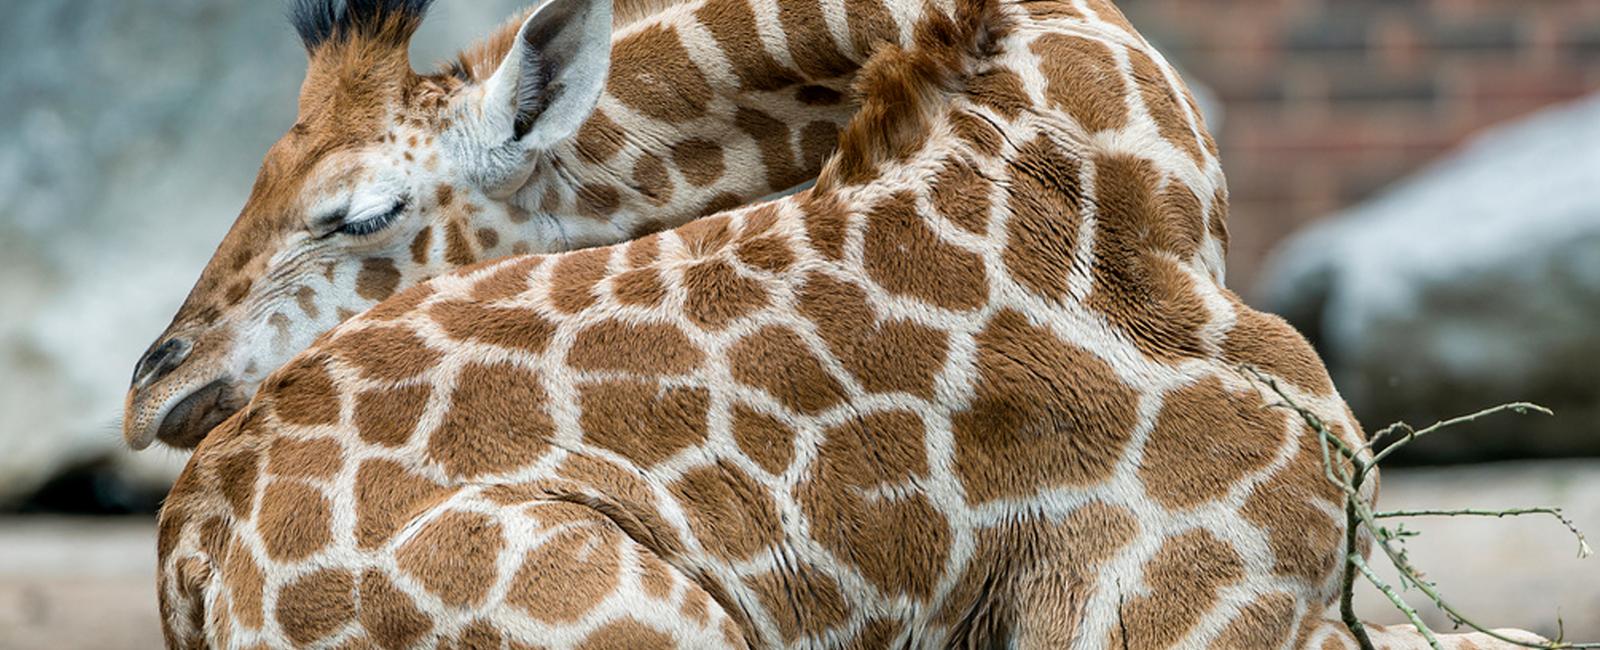 Giraffes rarely lay down they even sleep and give birth standing up